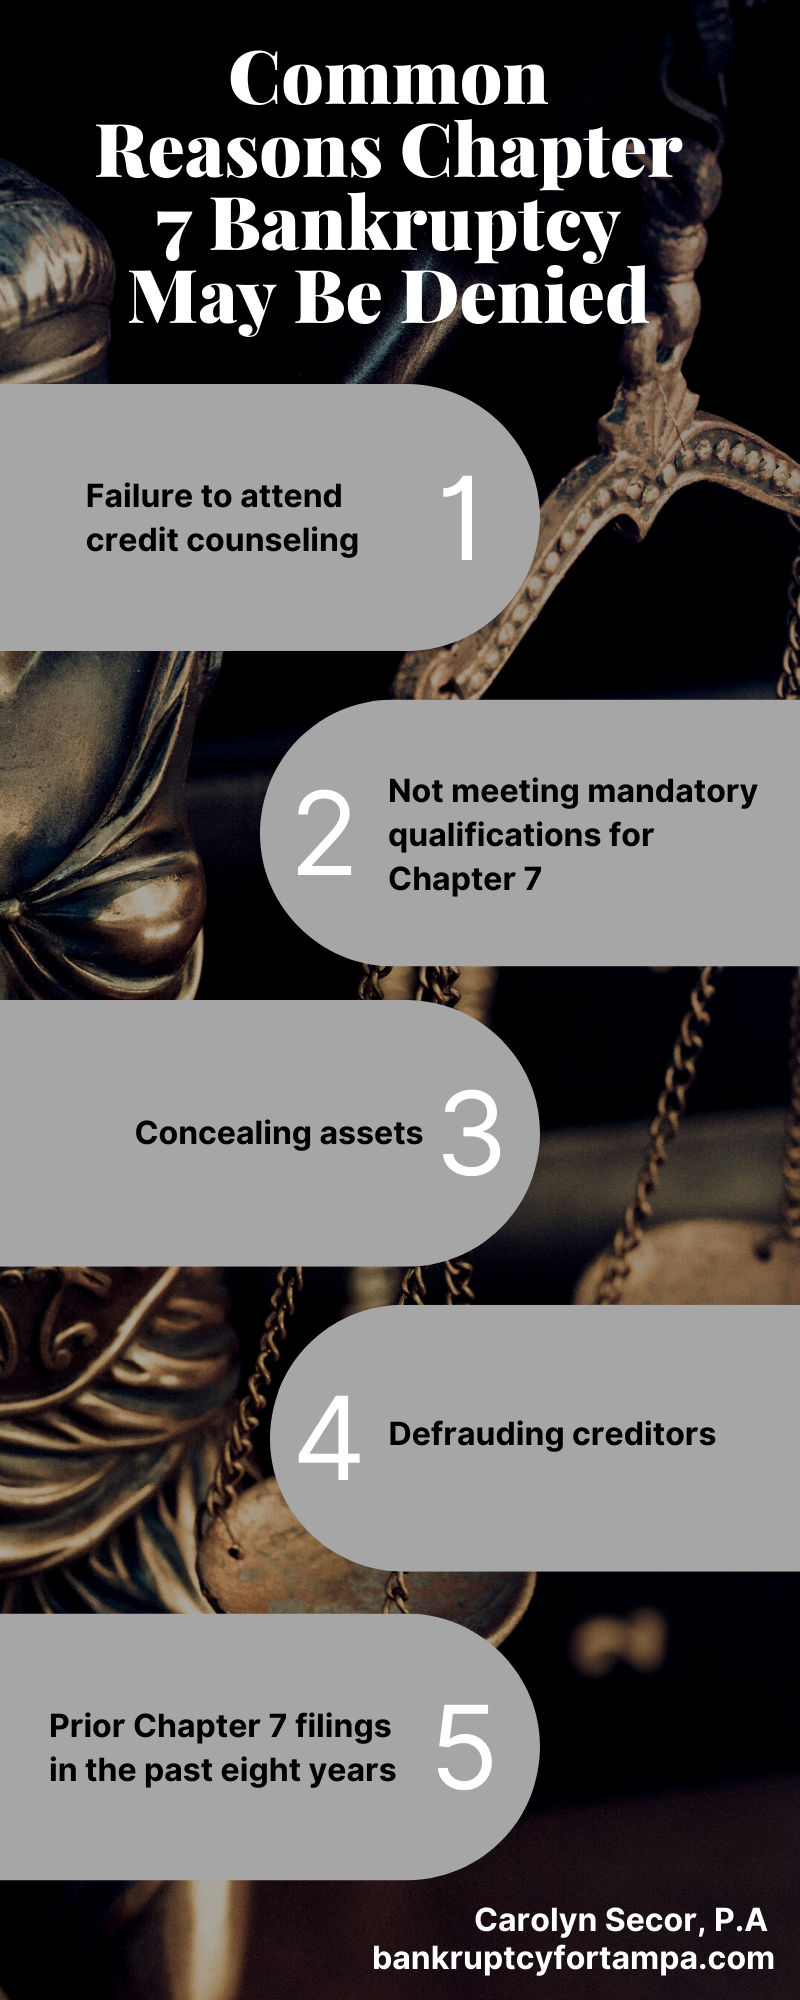 Common Reasons Chapter 7 Bankruptcy May Be Denied Infographic